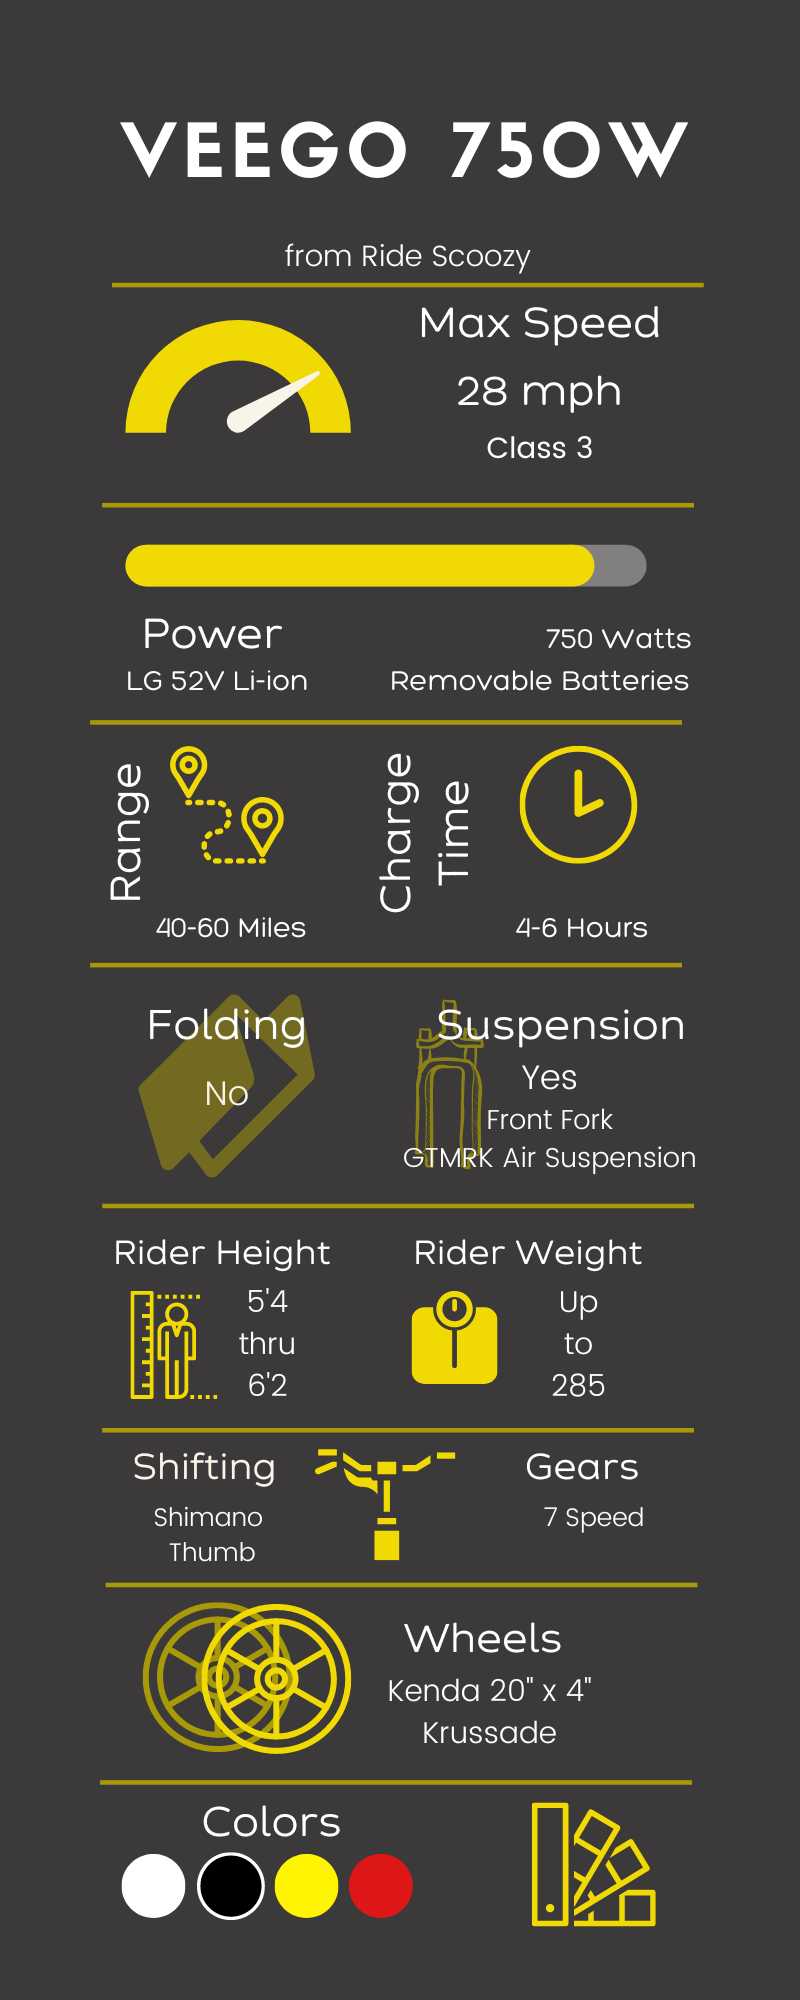 Infographic about the VeeGo 750 eBike from Ride Scoozy that is compatible with the Go4-E Connection Kit to create a Blackbird Bikes Sociable Tandem side-by-side quadribike. This 4 wheel bicycle offers a stable ride inclusive for all abilities and adaptive to special needs riders.